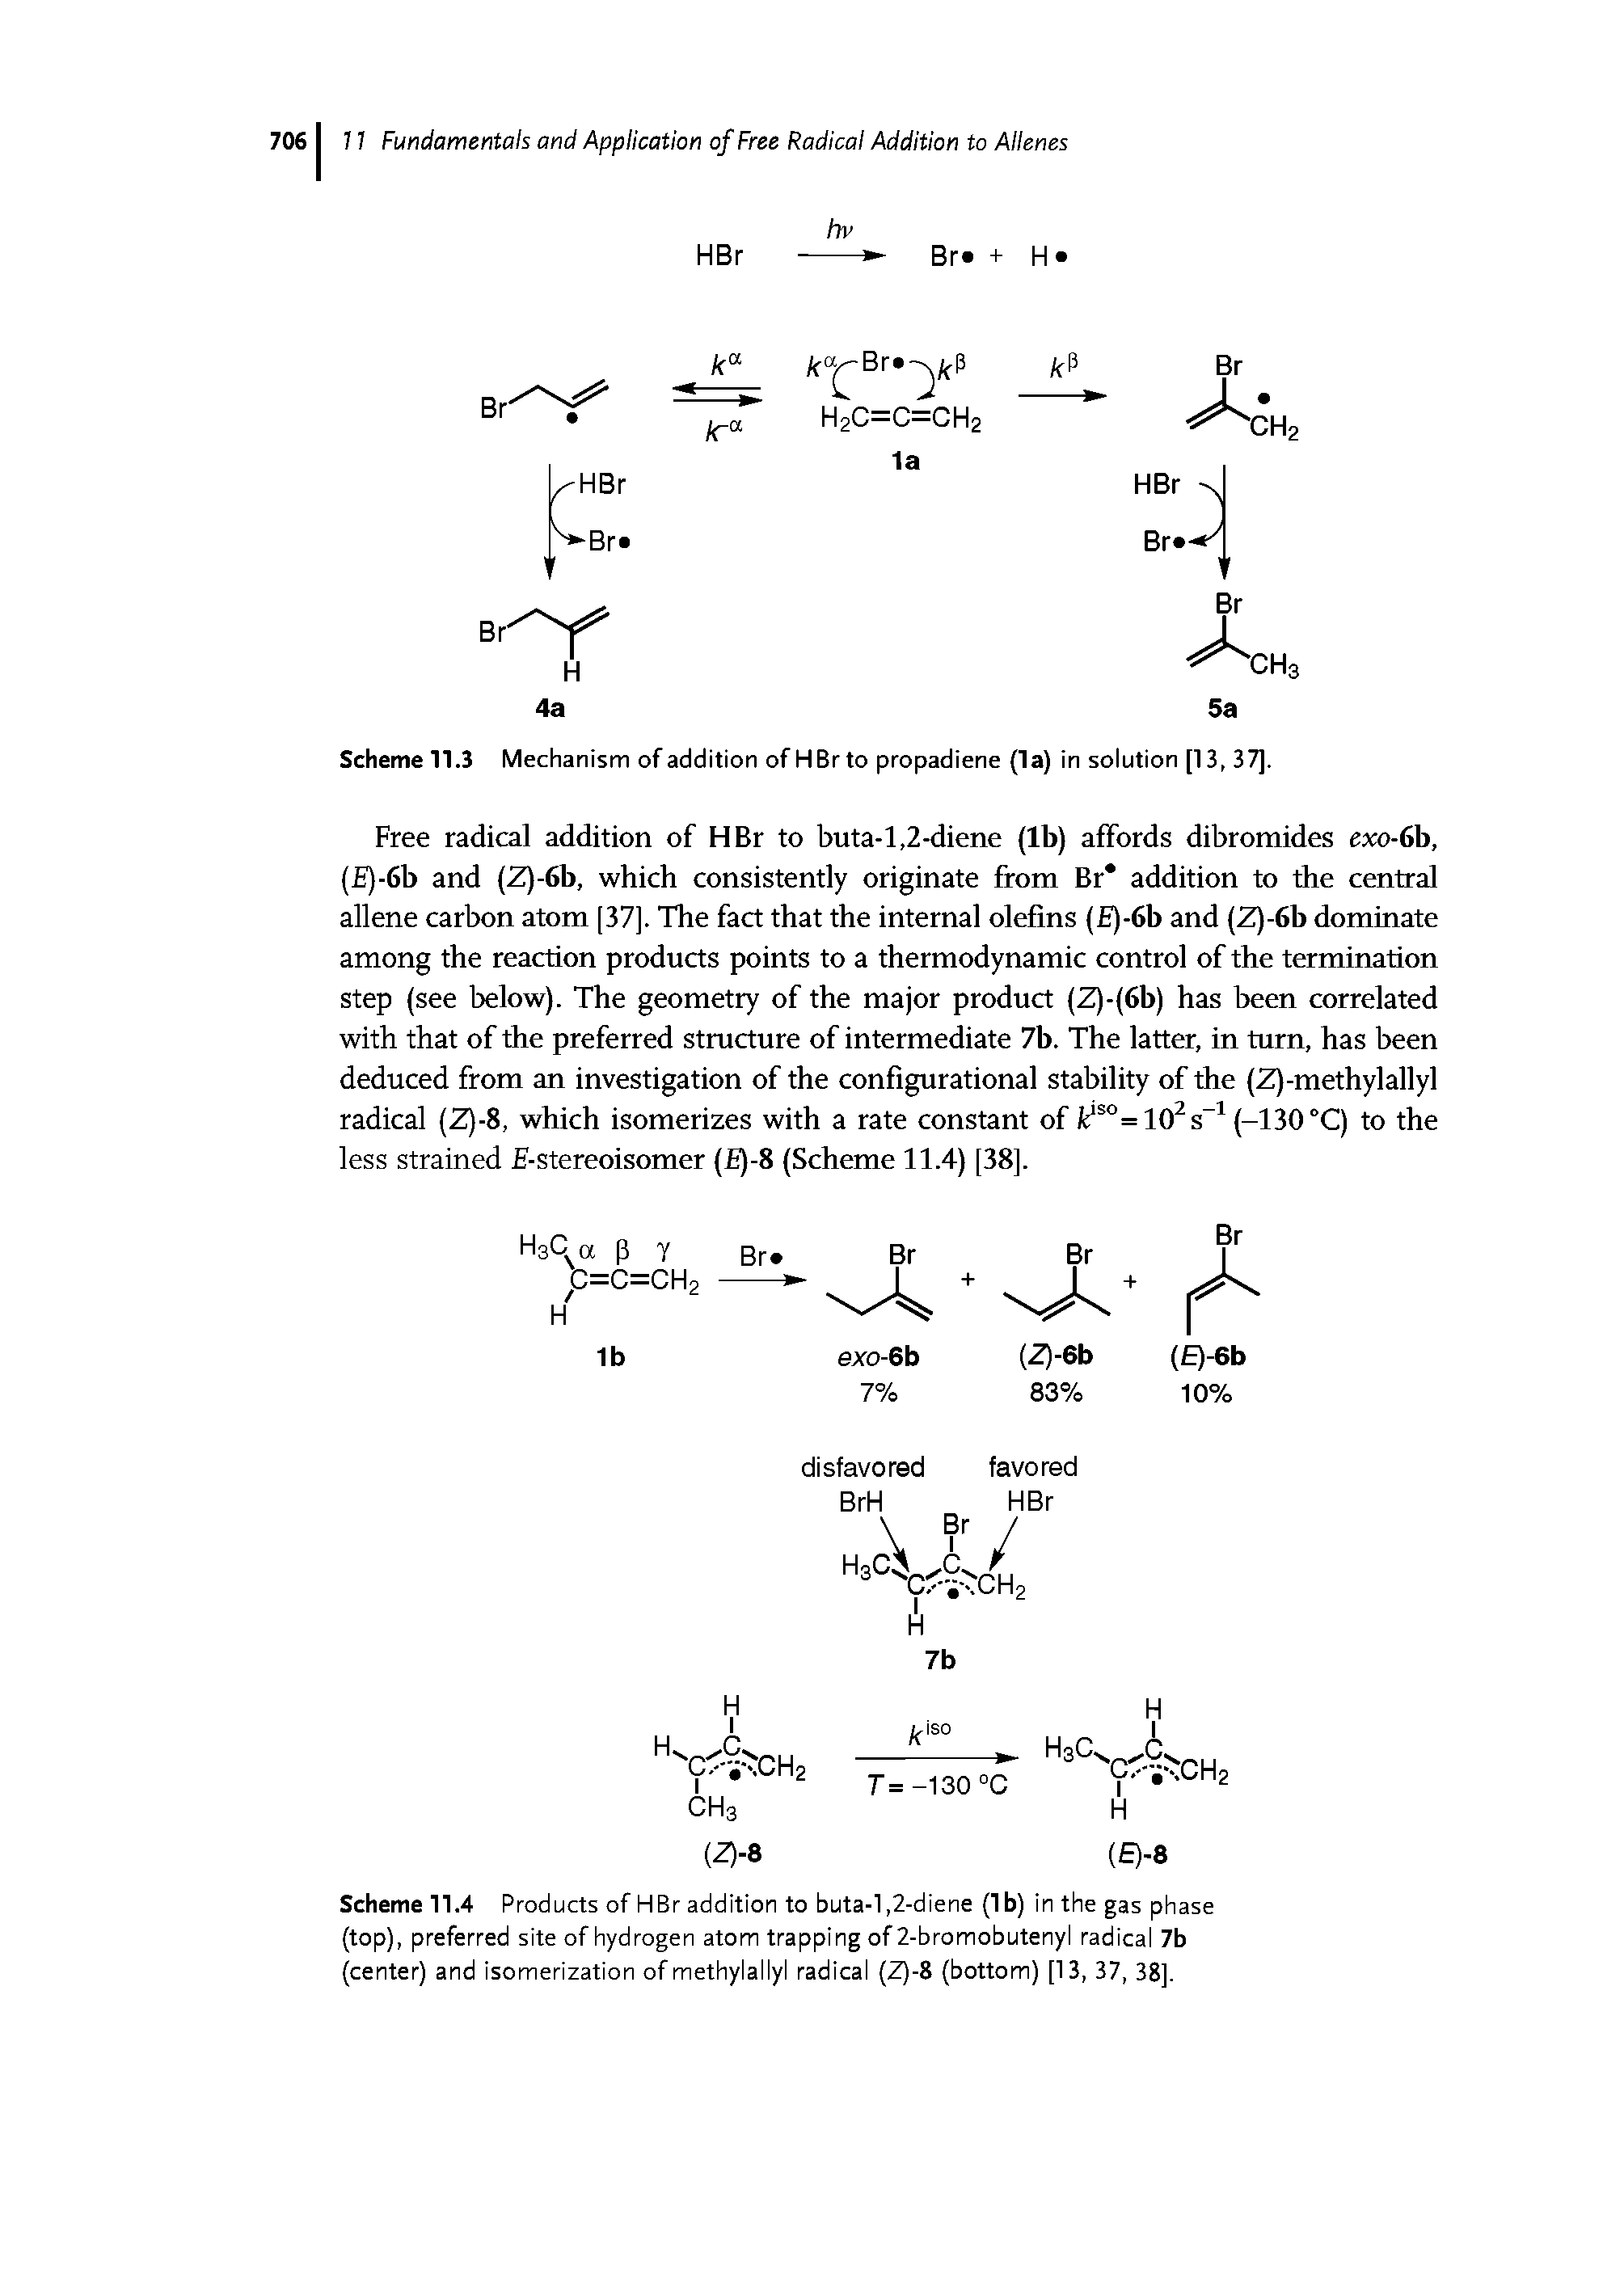 Scheme 11.4 Products of HBr addition to buta-1,2-diene (lb) in the gas phase (top), preferred site of hydrogen atom trapping of 2-bromobutenyl radical 7b (center) and isomerization of methylallyl radical (Z)-8 (bottom) [13, 37, 38].